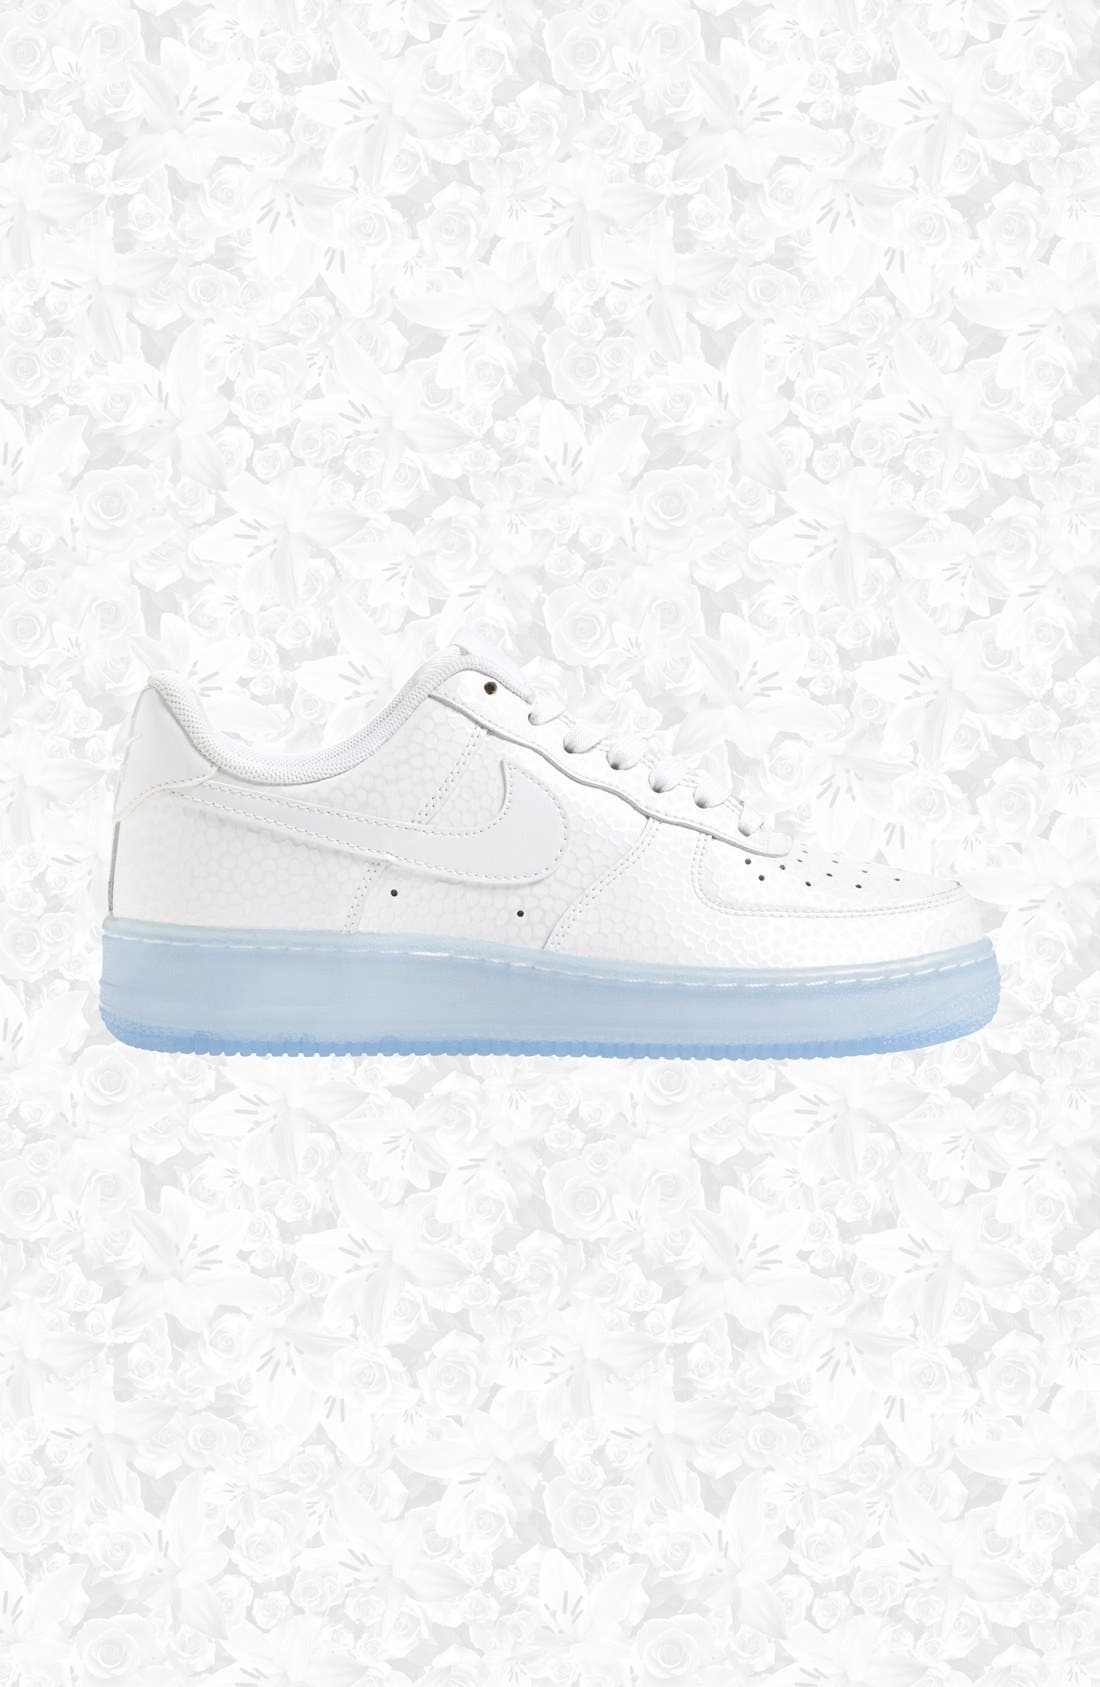 nordstrom nike air force one